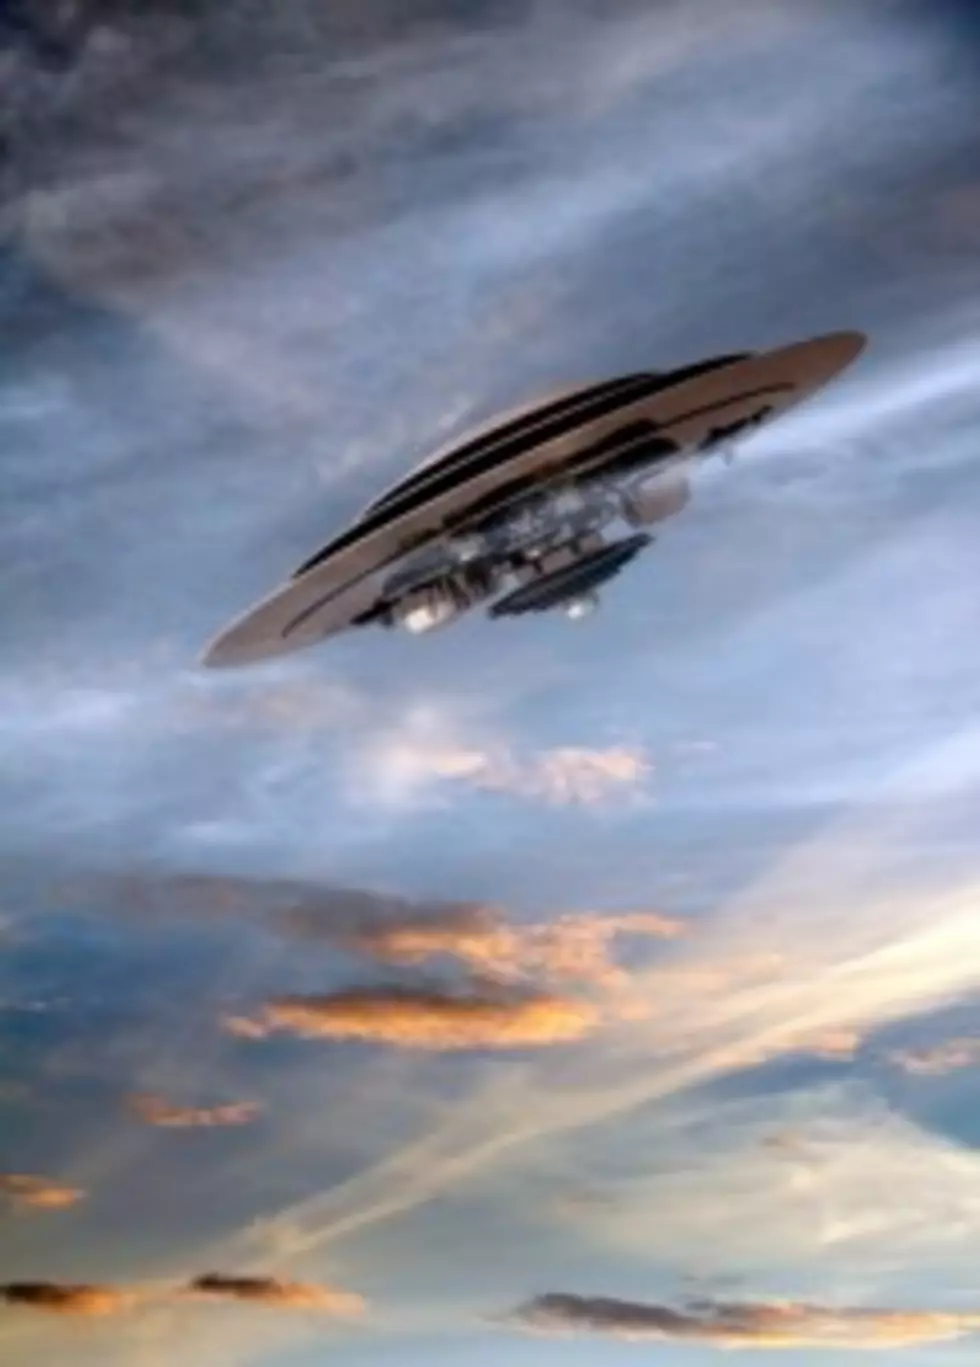 I Know People Who Have Seen UFOs &#8212; Are You a Believer?